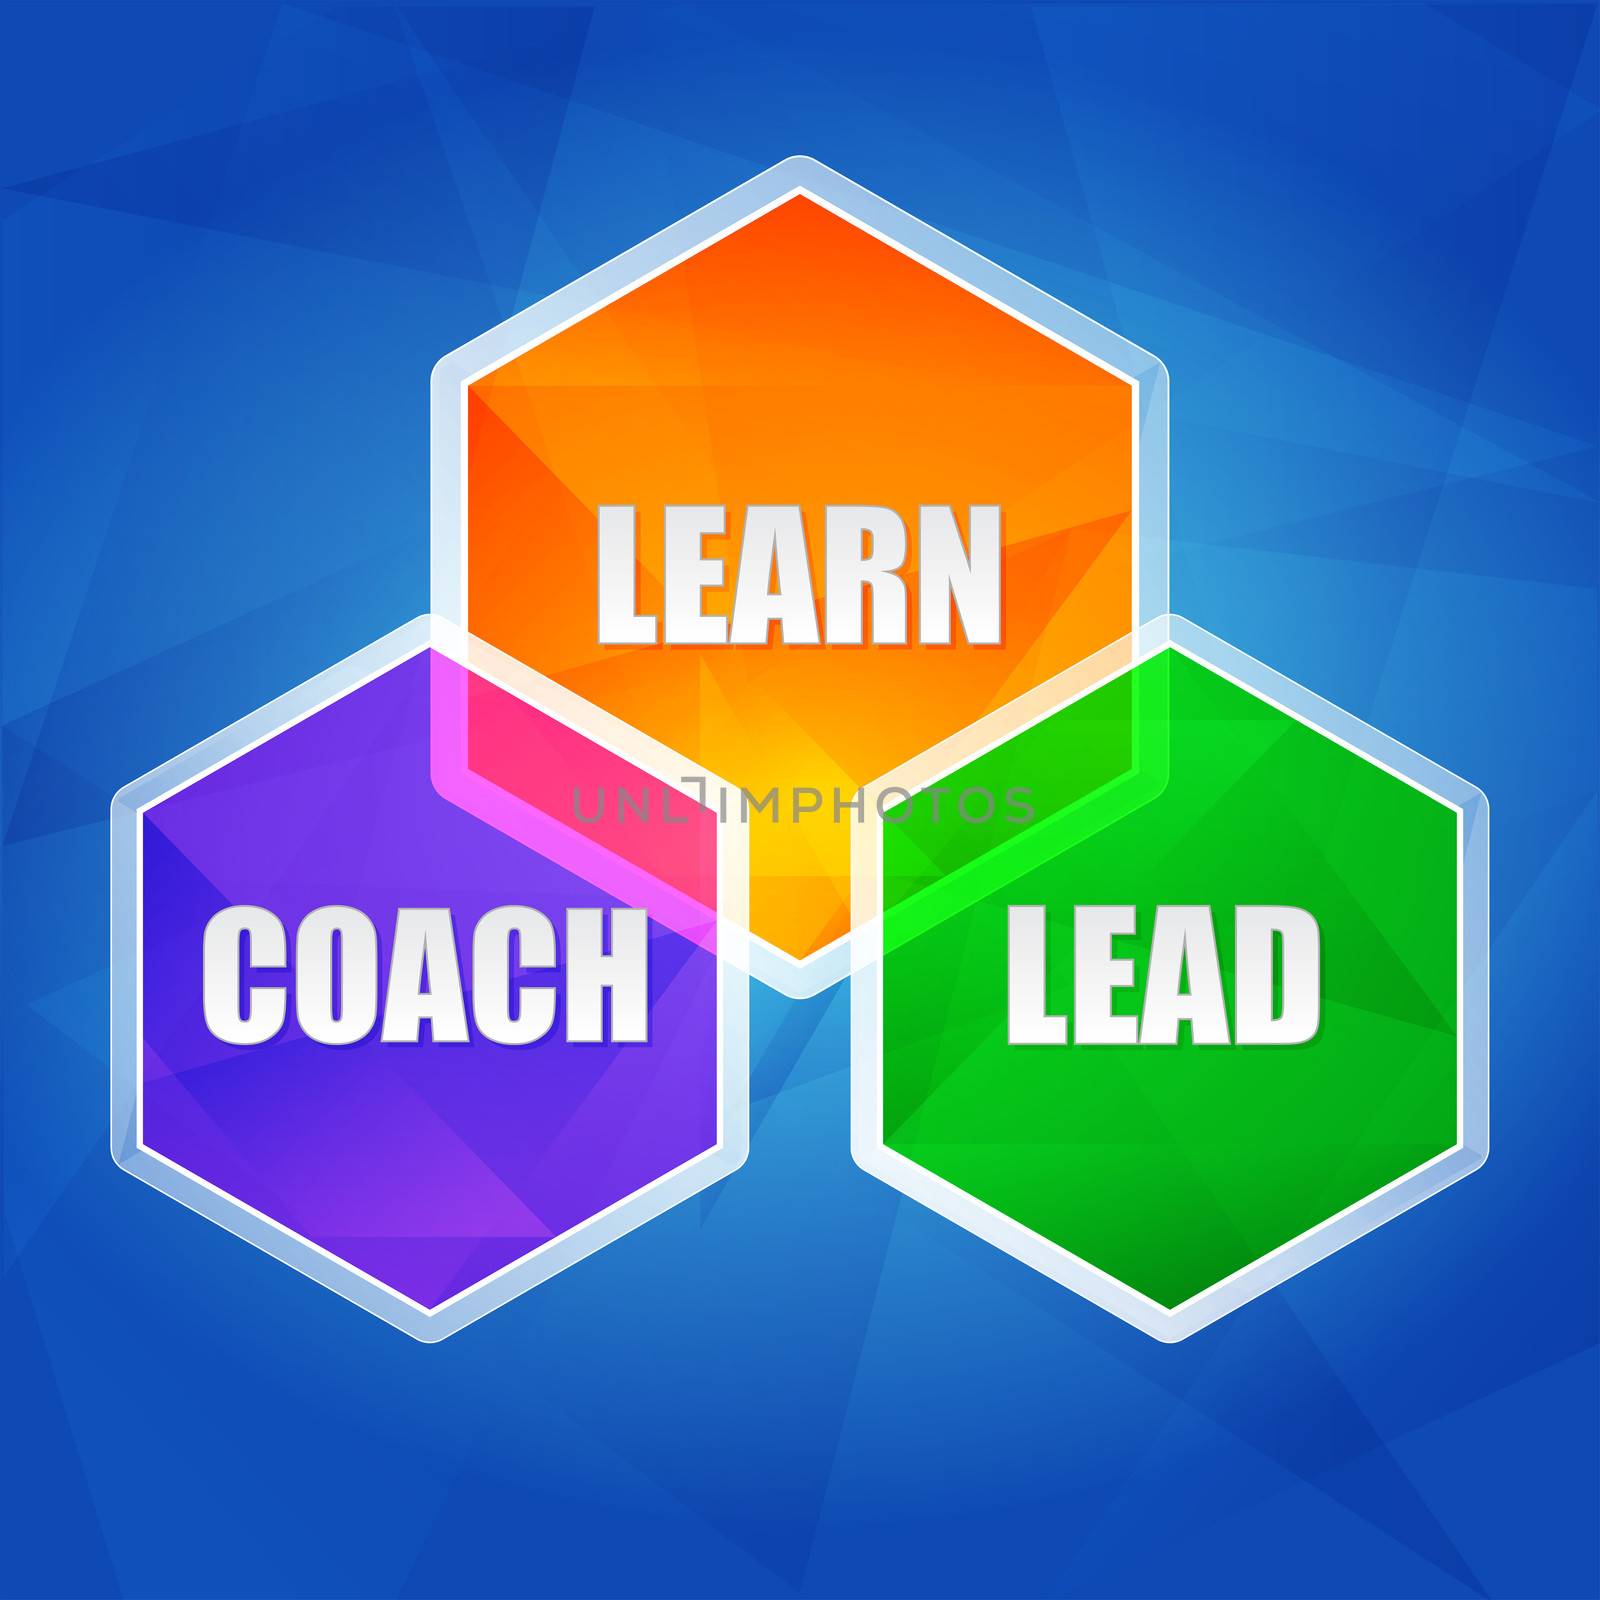 learn, coach, lead - business education concept words in color hexagons over blue background, flat design